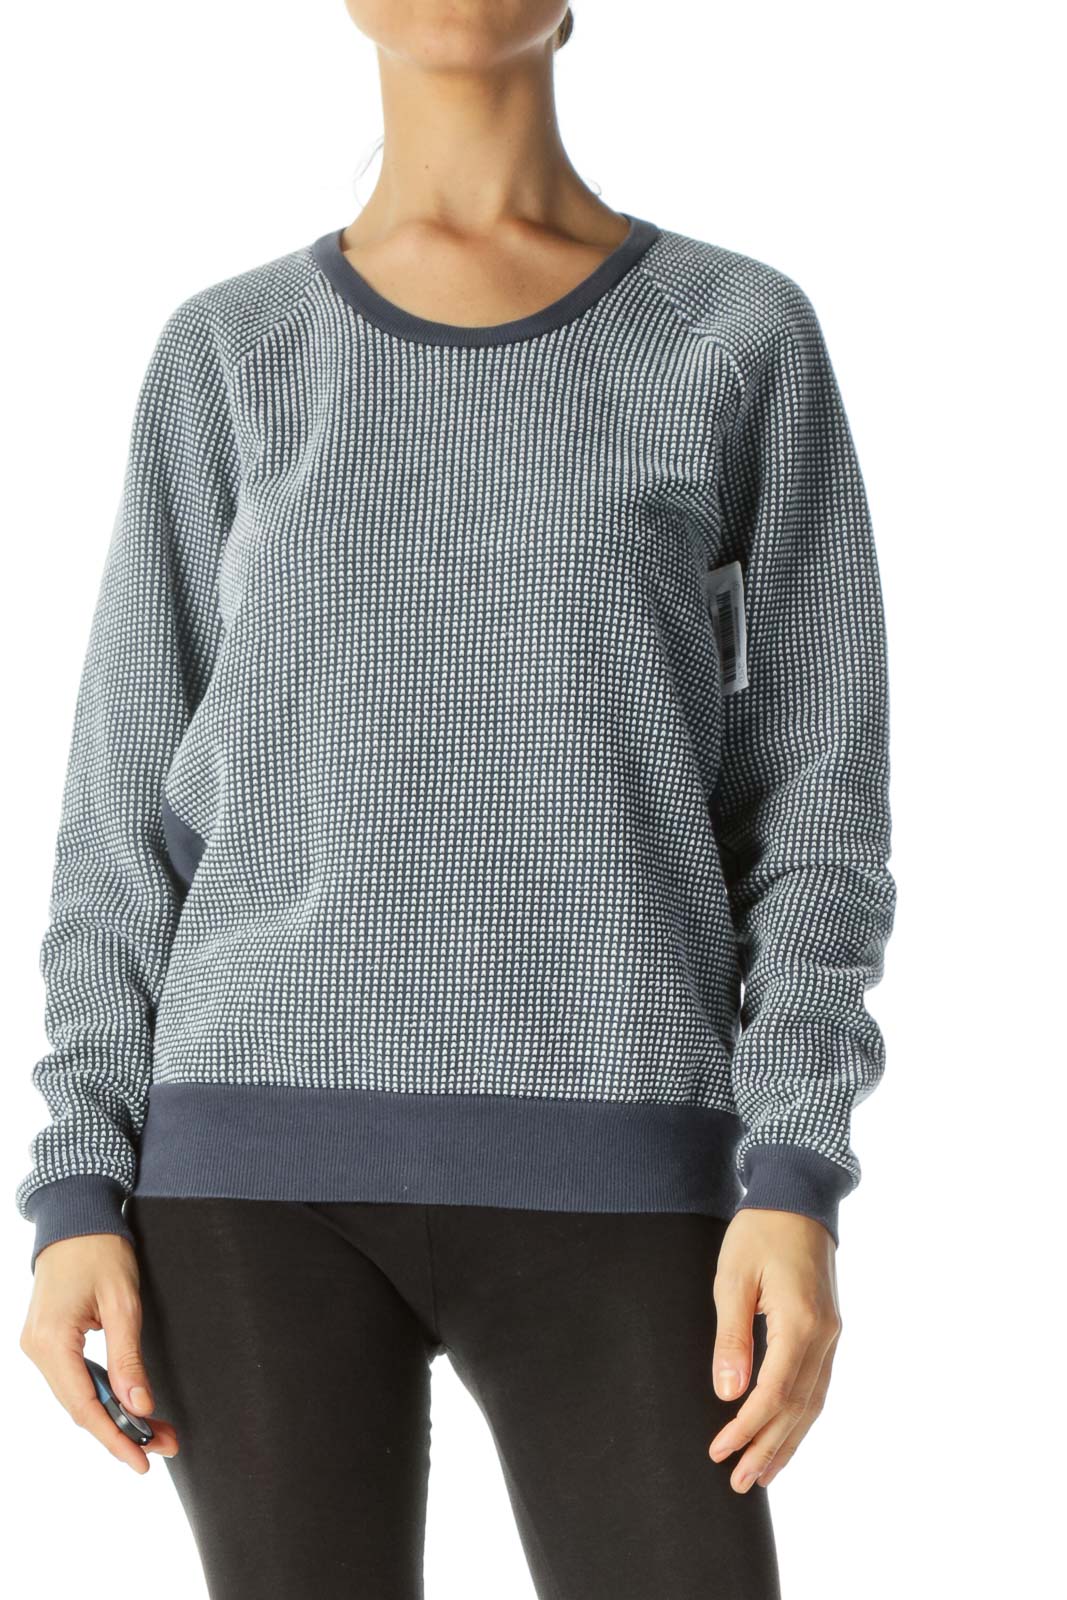 Navy & White Knitted-Print Crew-Neck Sweater Front